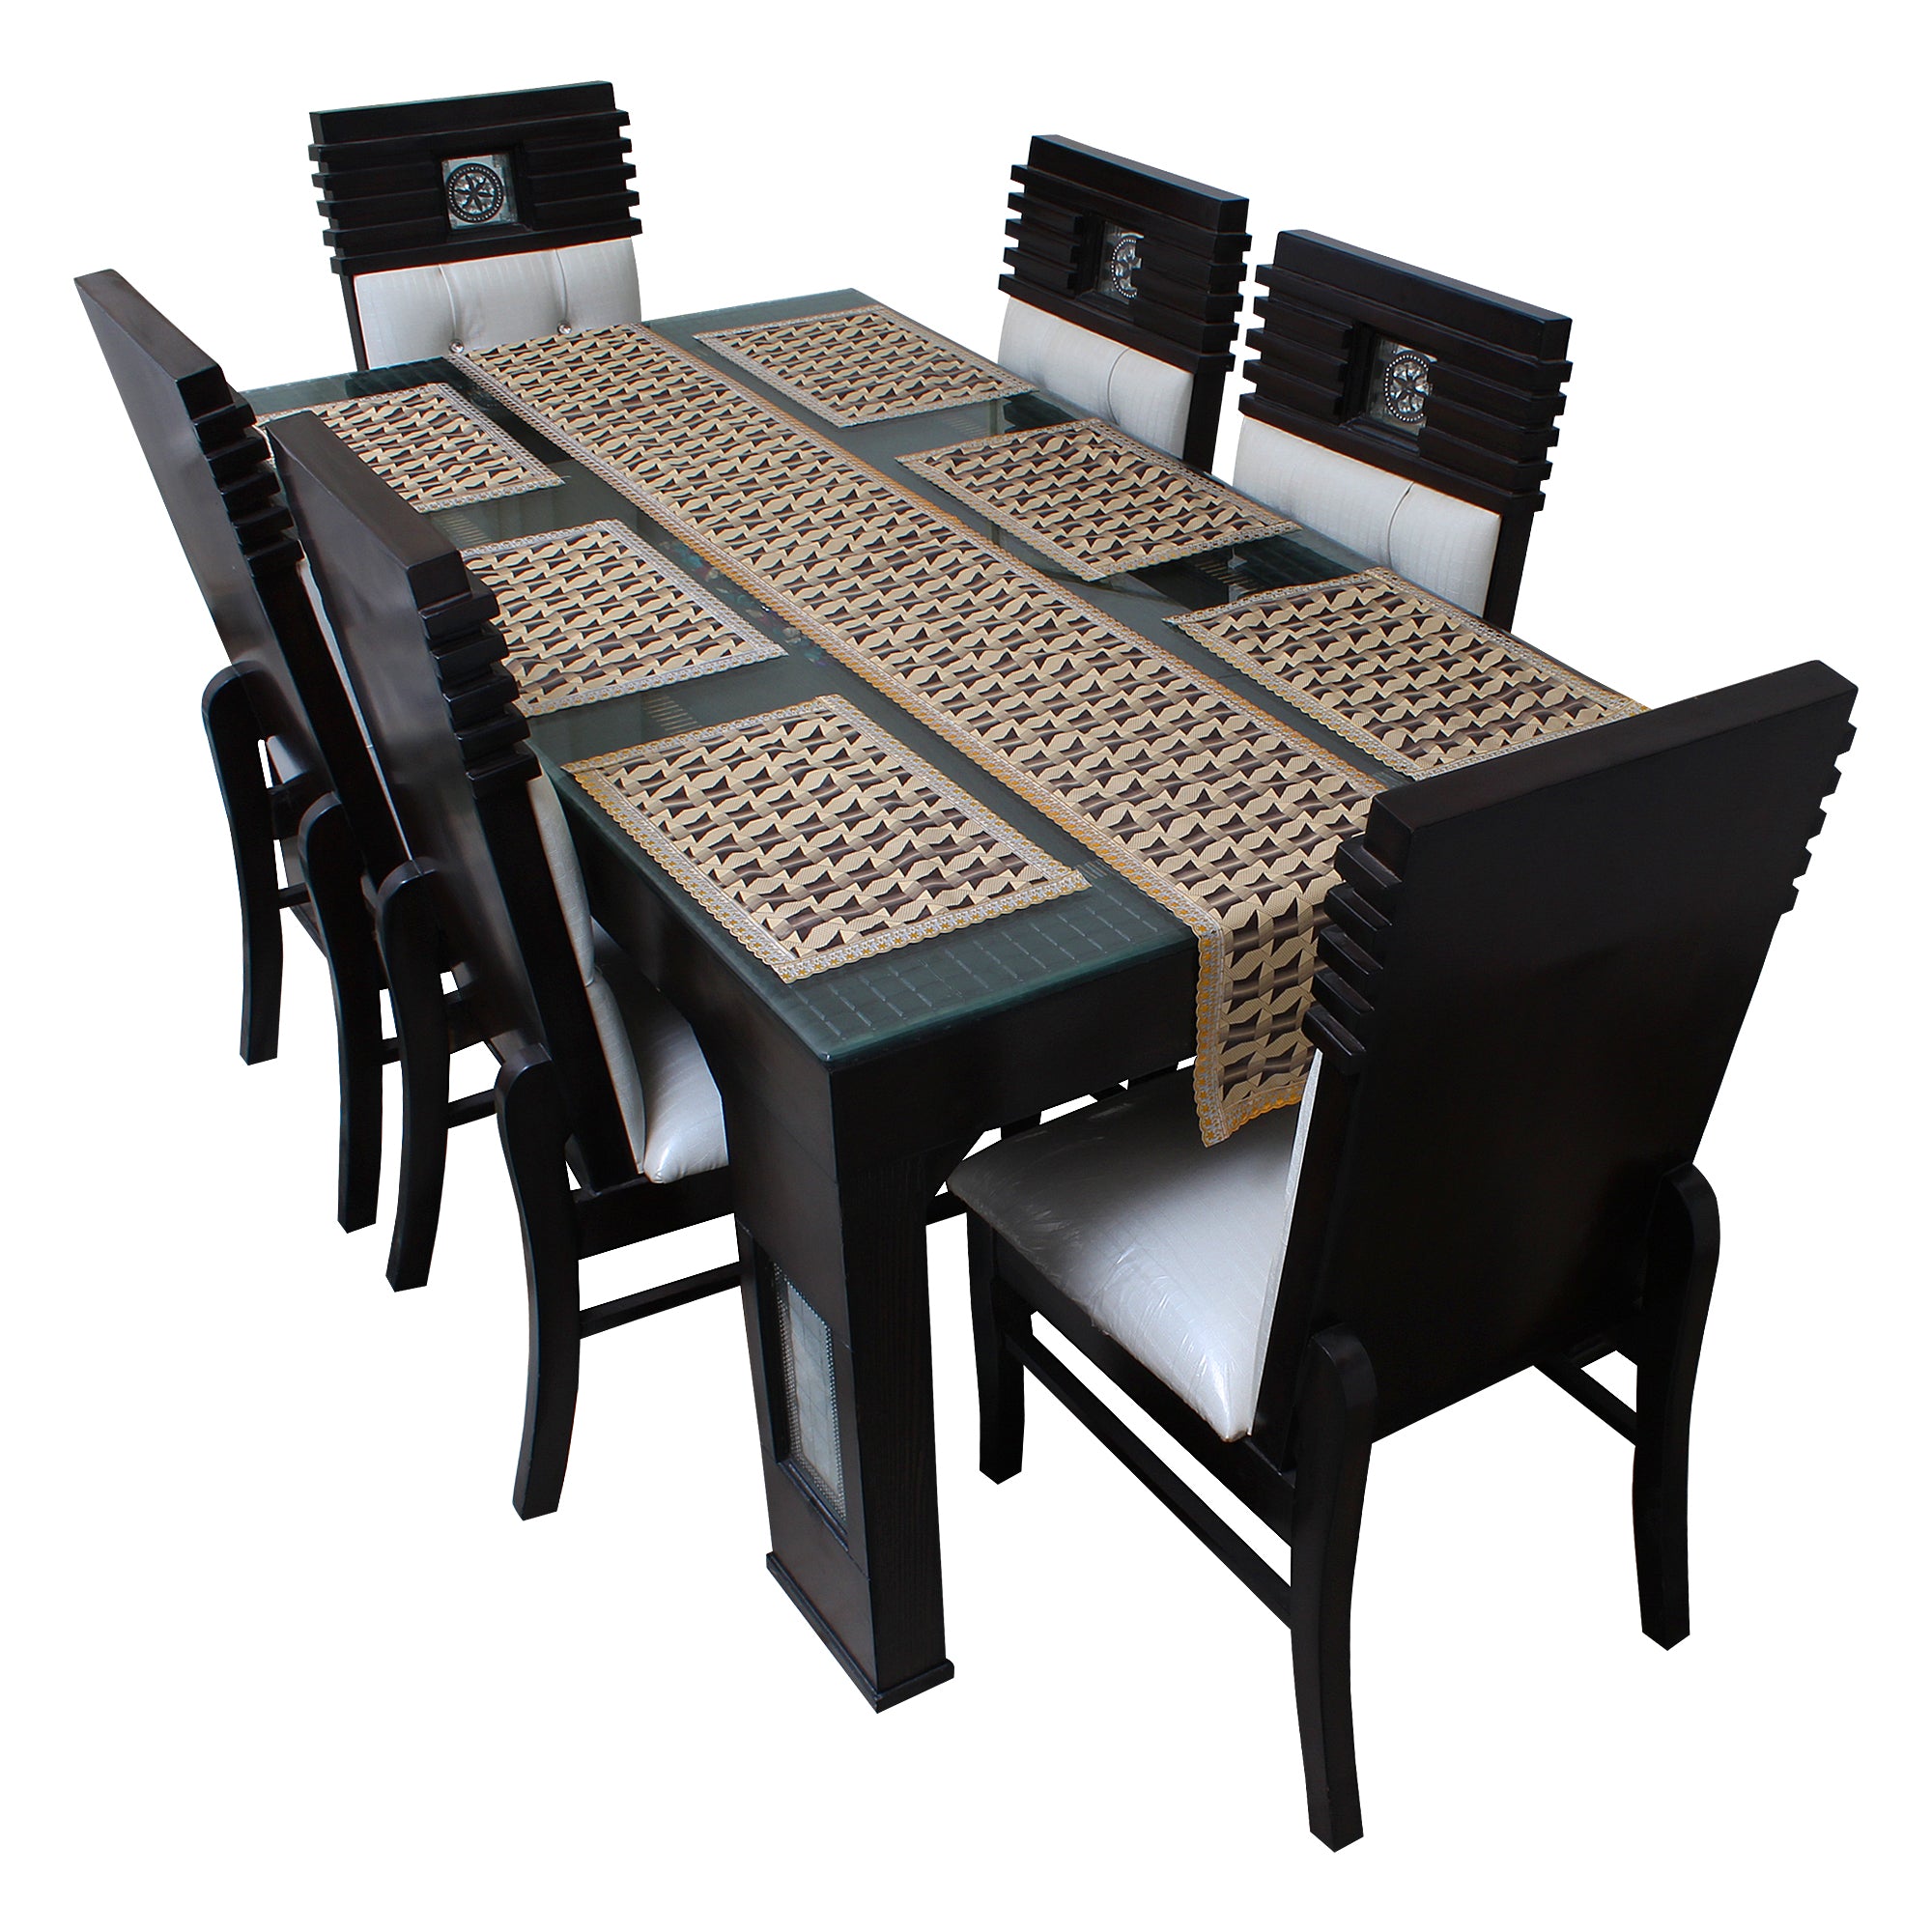 Waterproof & Dustproof Dining Table Runner With 6 Placemats, SA06 - Dream Care Furnishings Private Limited